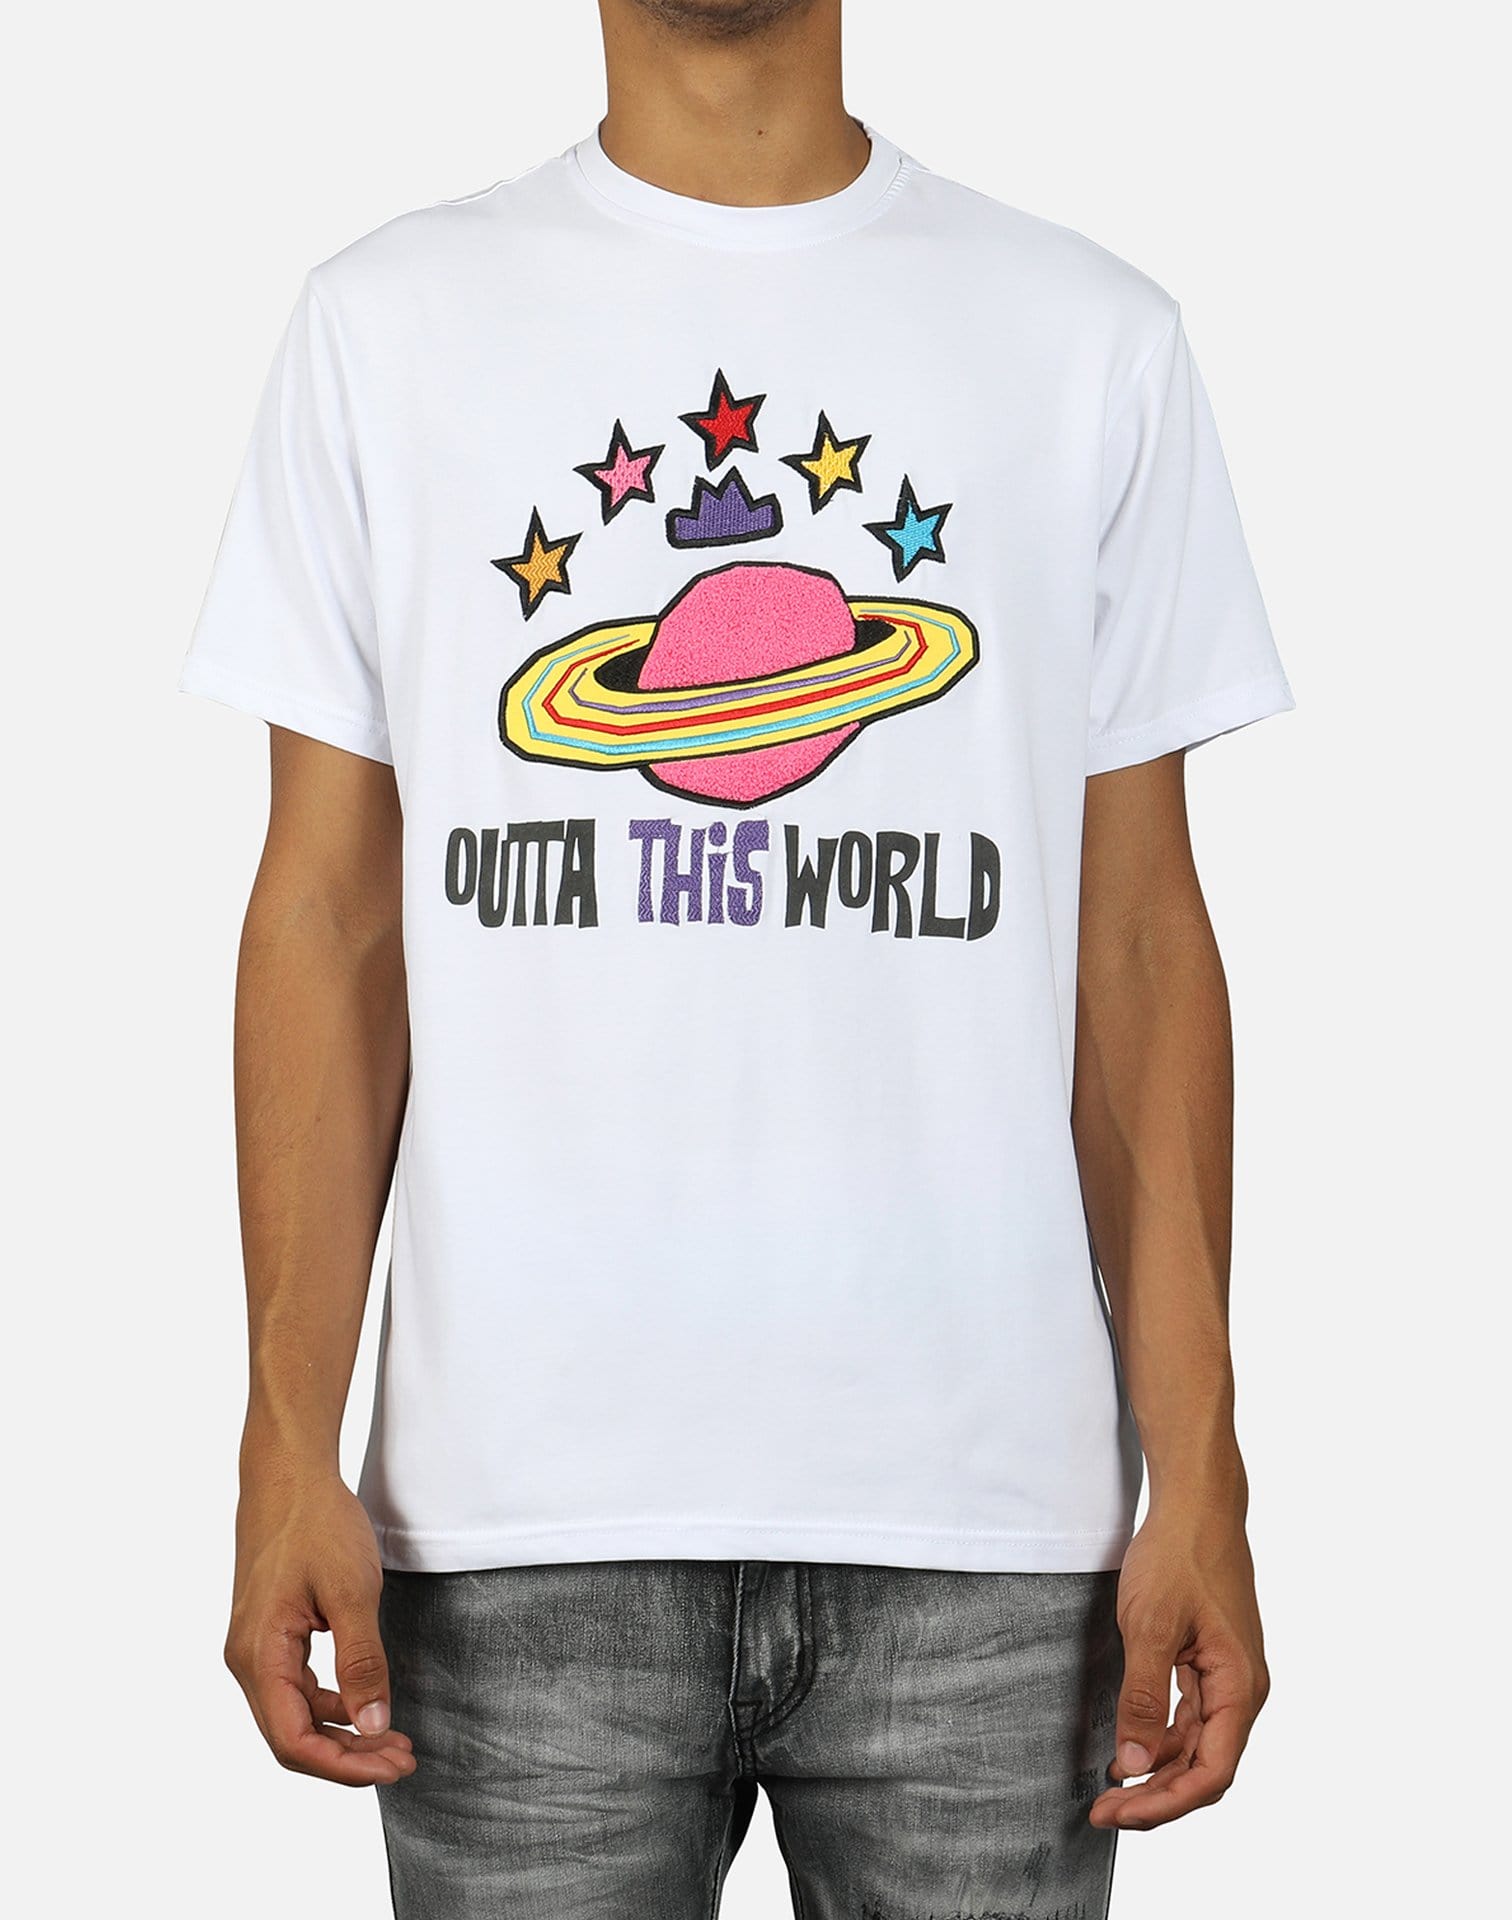 K and S Men's Outta This World Tee